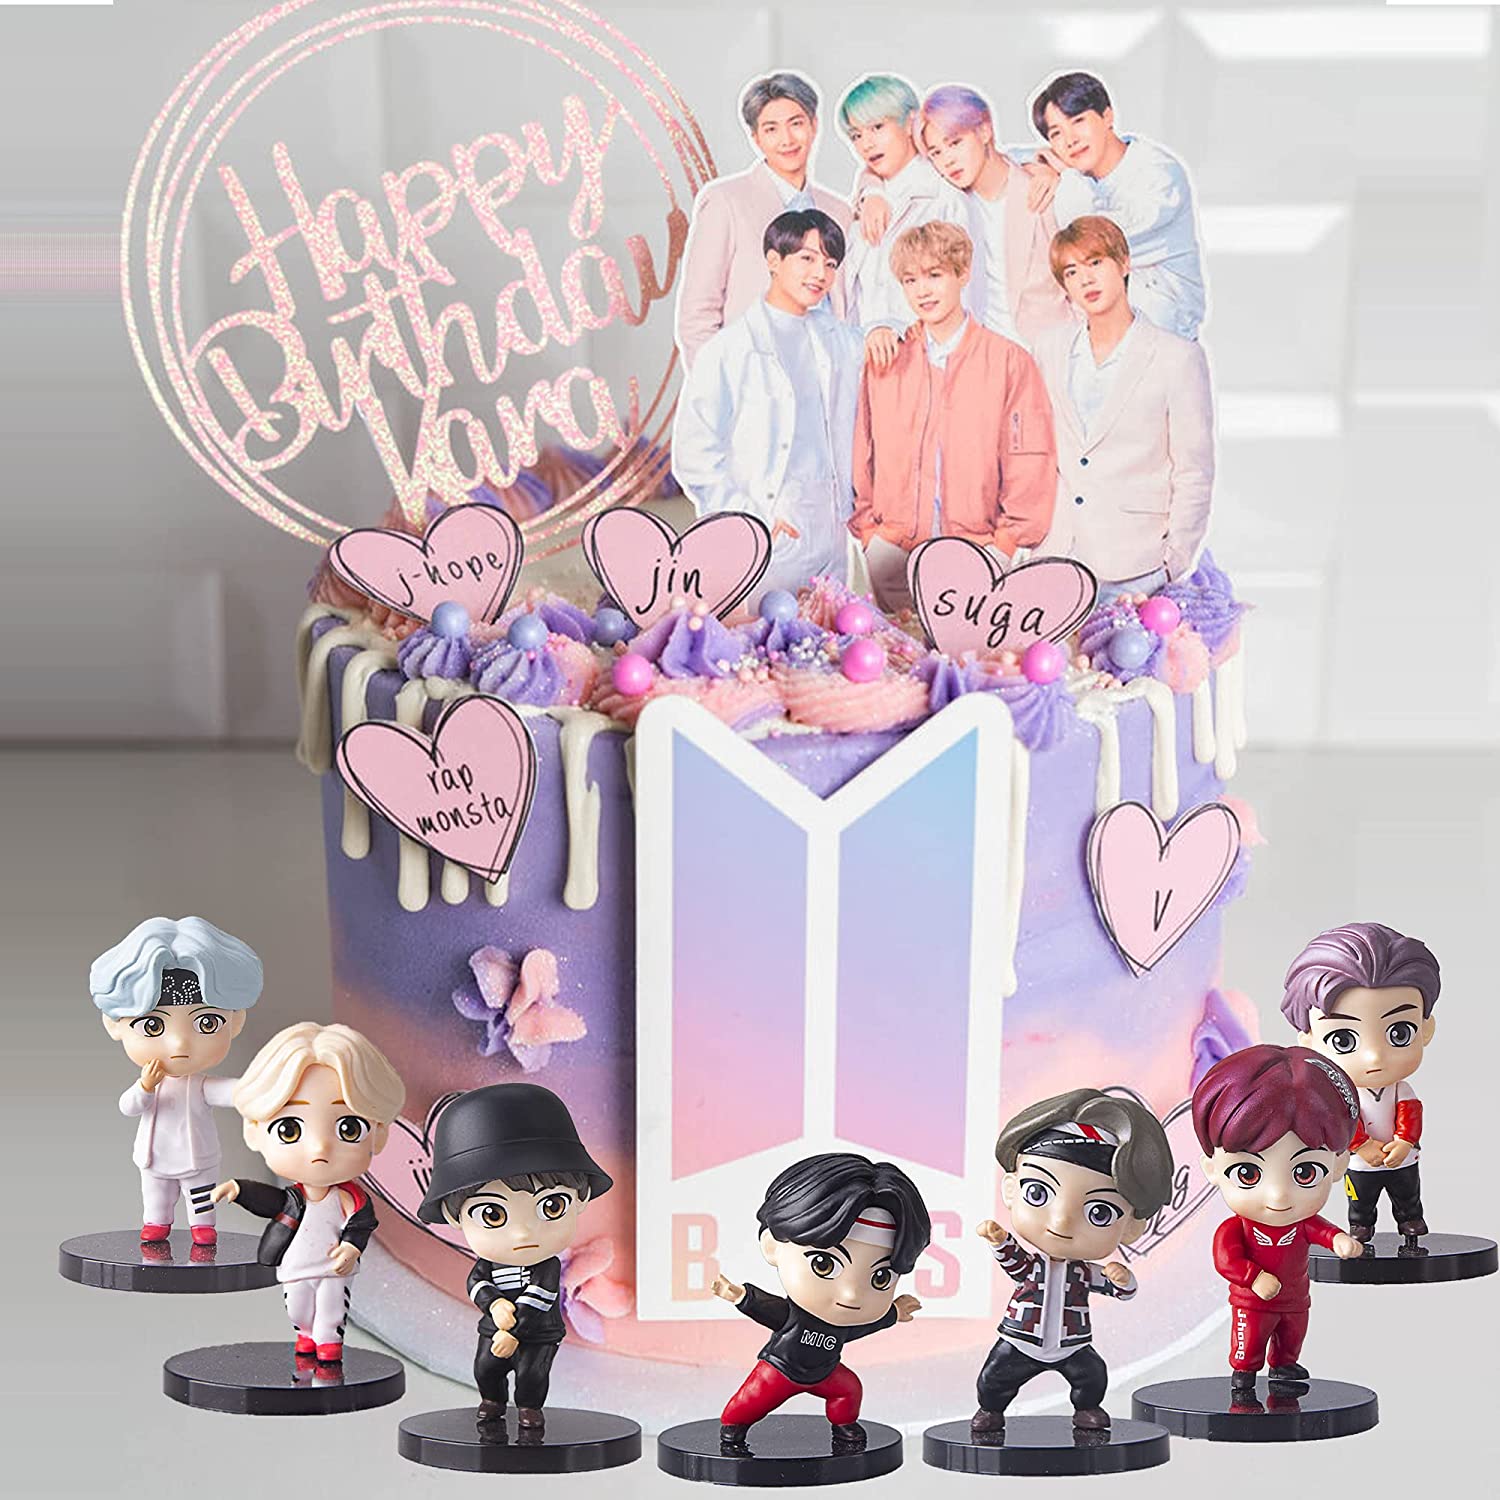 7 PCS B^TS Collection Figure Toy Set for Cake Topper B^TS Party Supplier Premium Cake Toppers and Party Decoration for B^TS party supplier